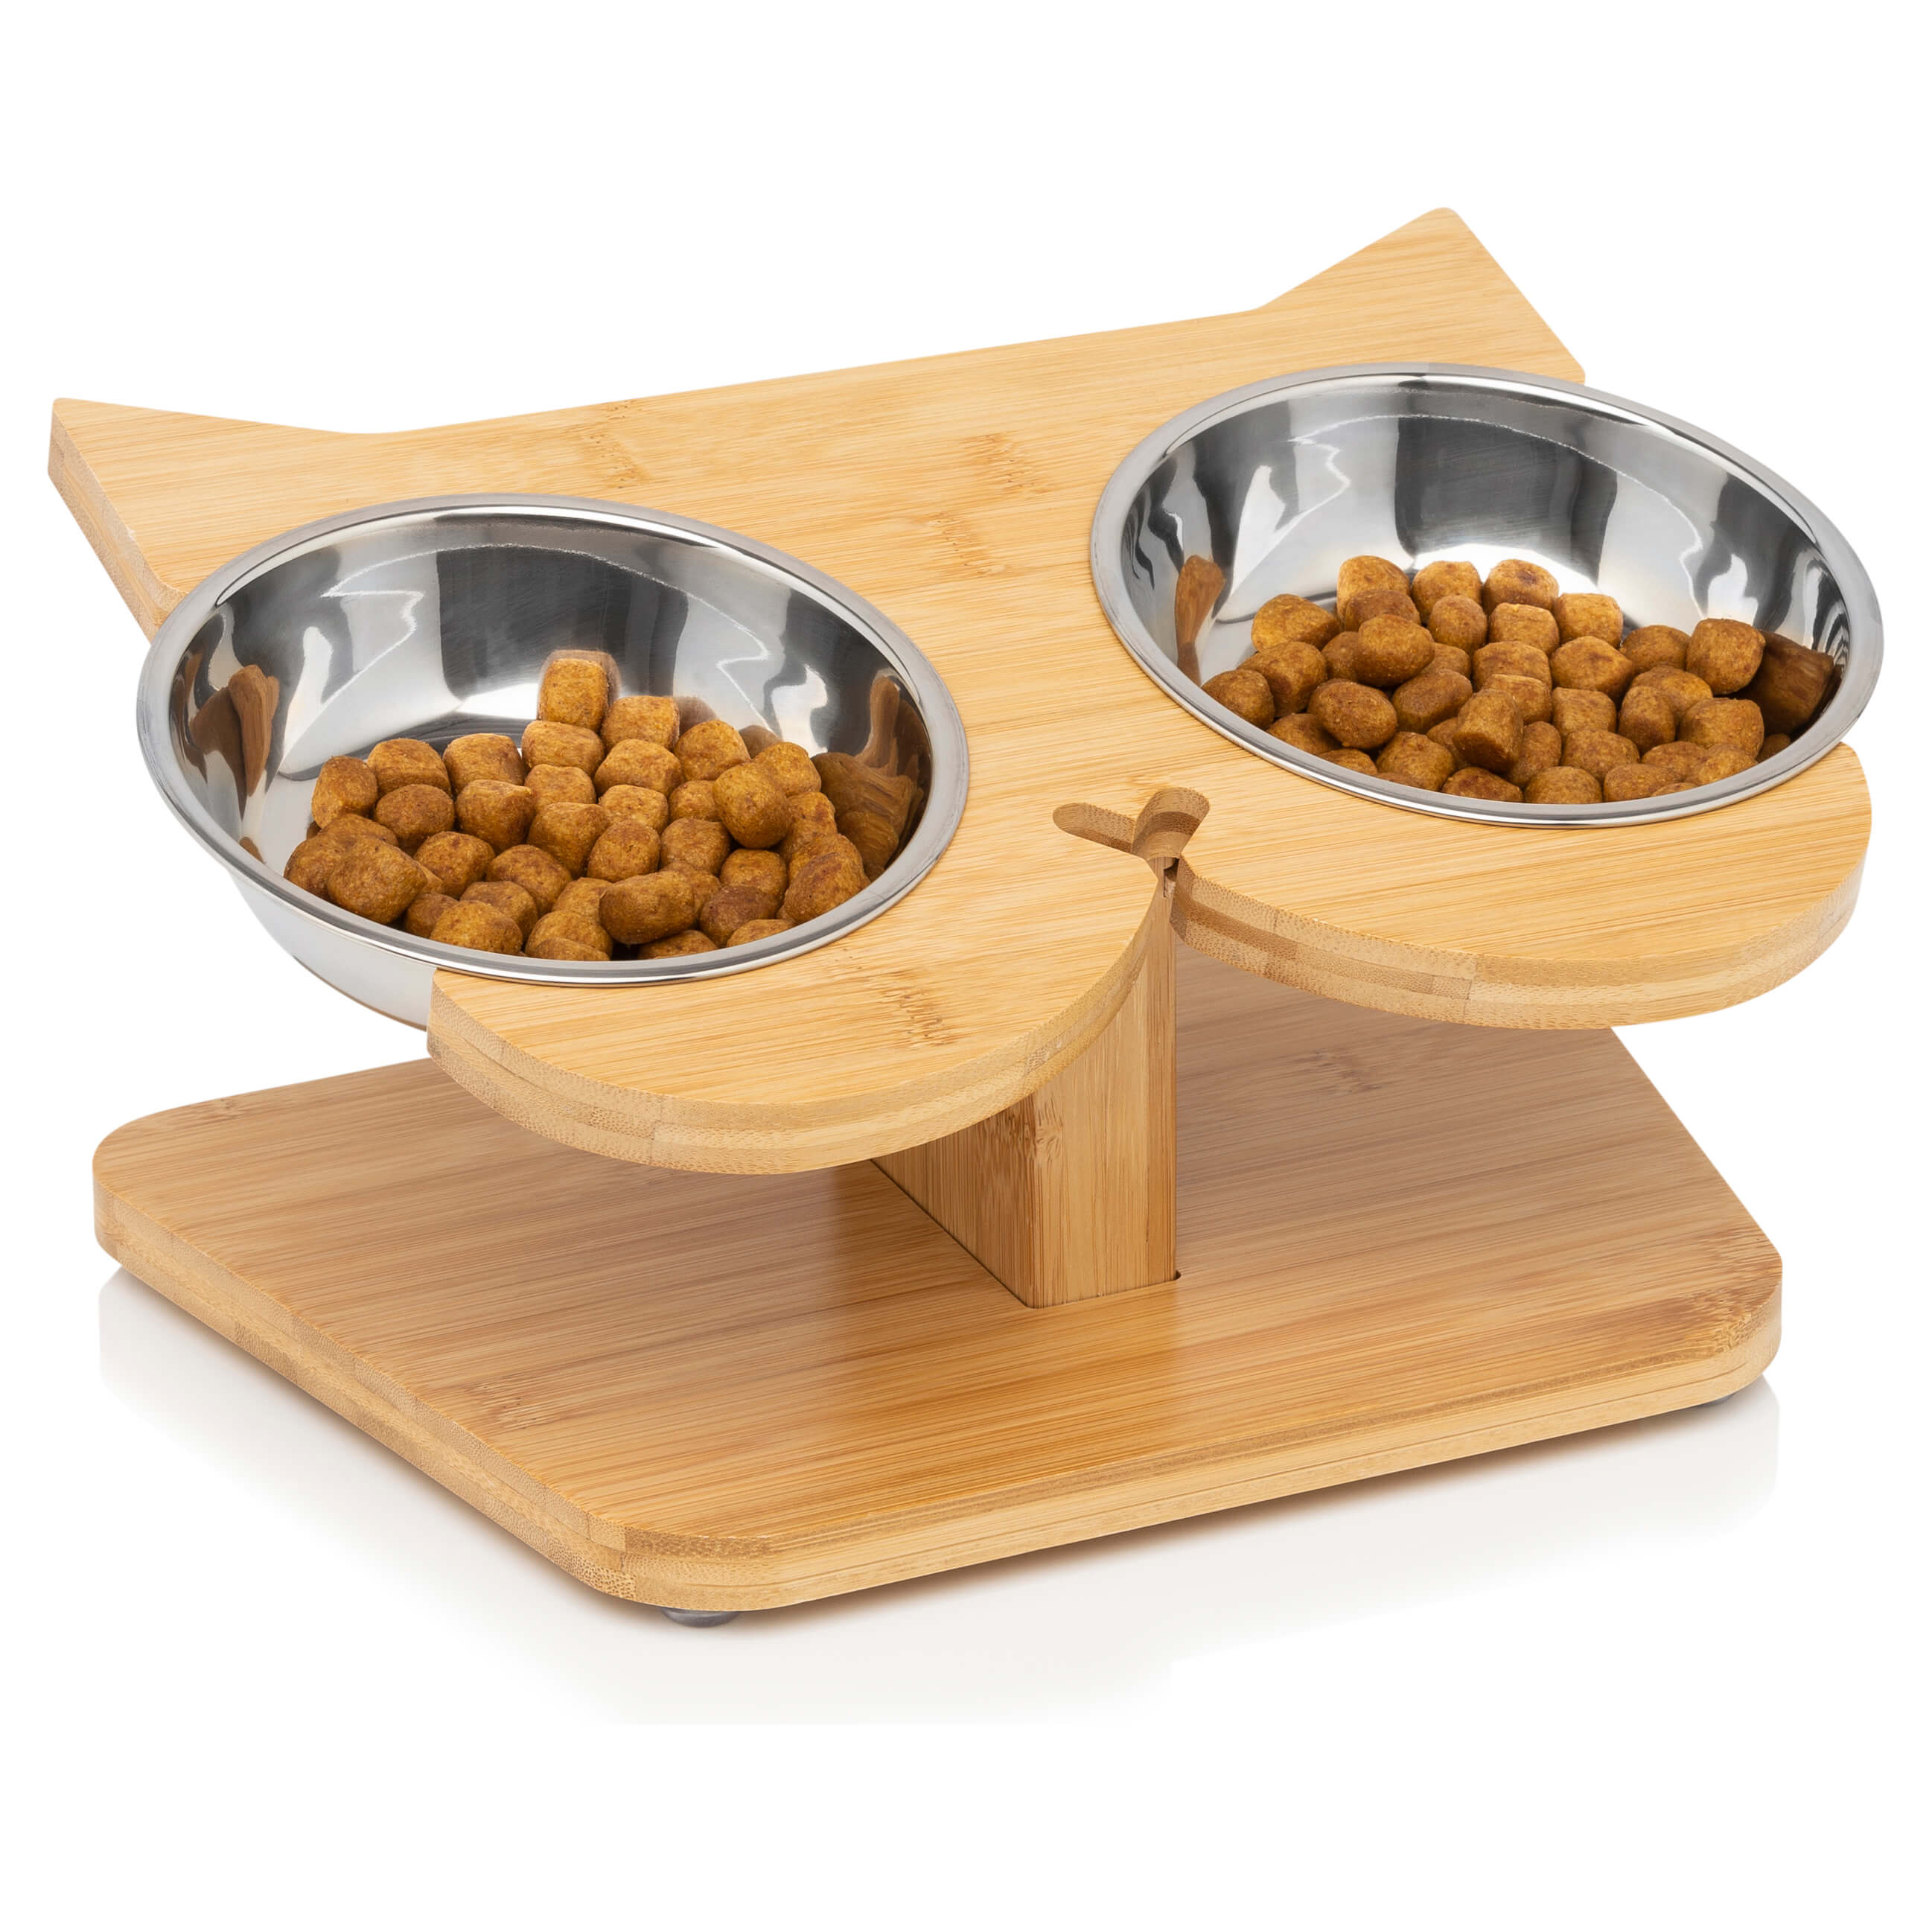 What's in your dog/cats bowl? – Part 2: Canine Enrichment Feeding